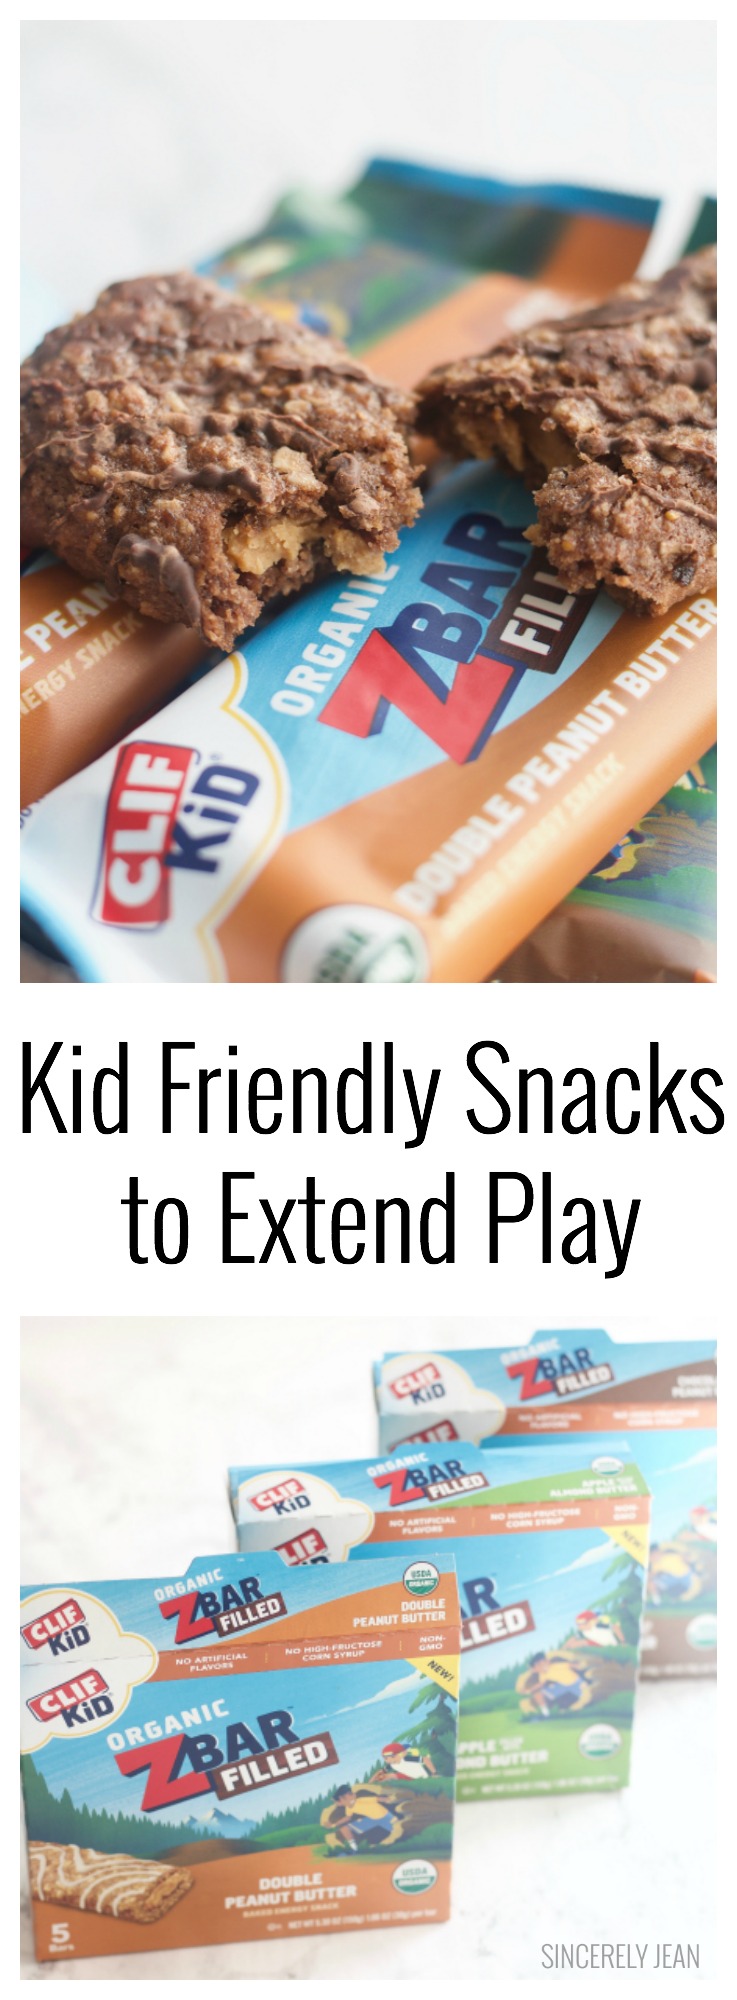 Kid Friendly Snacks to Extend Play - easy - on the go - simple